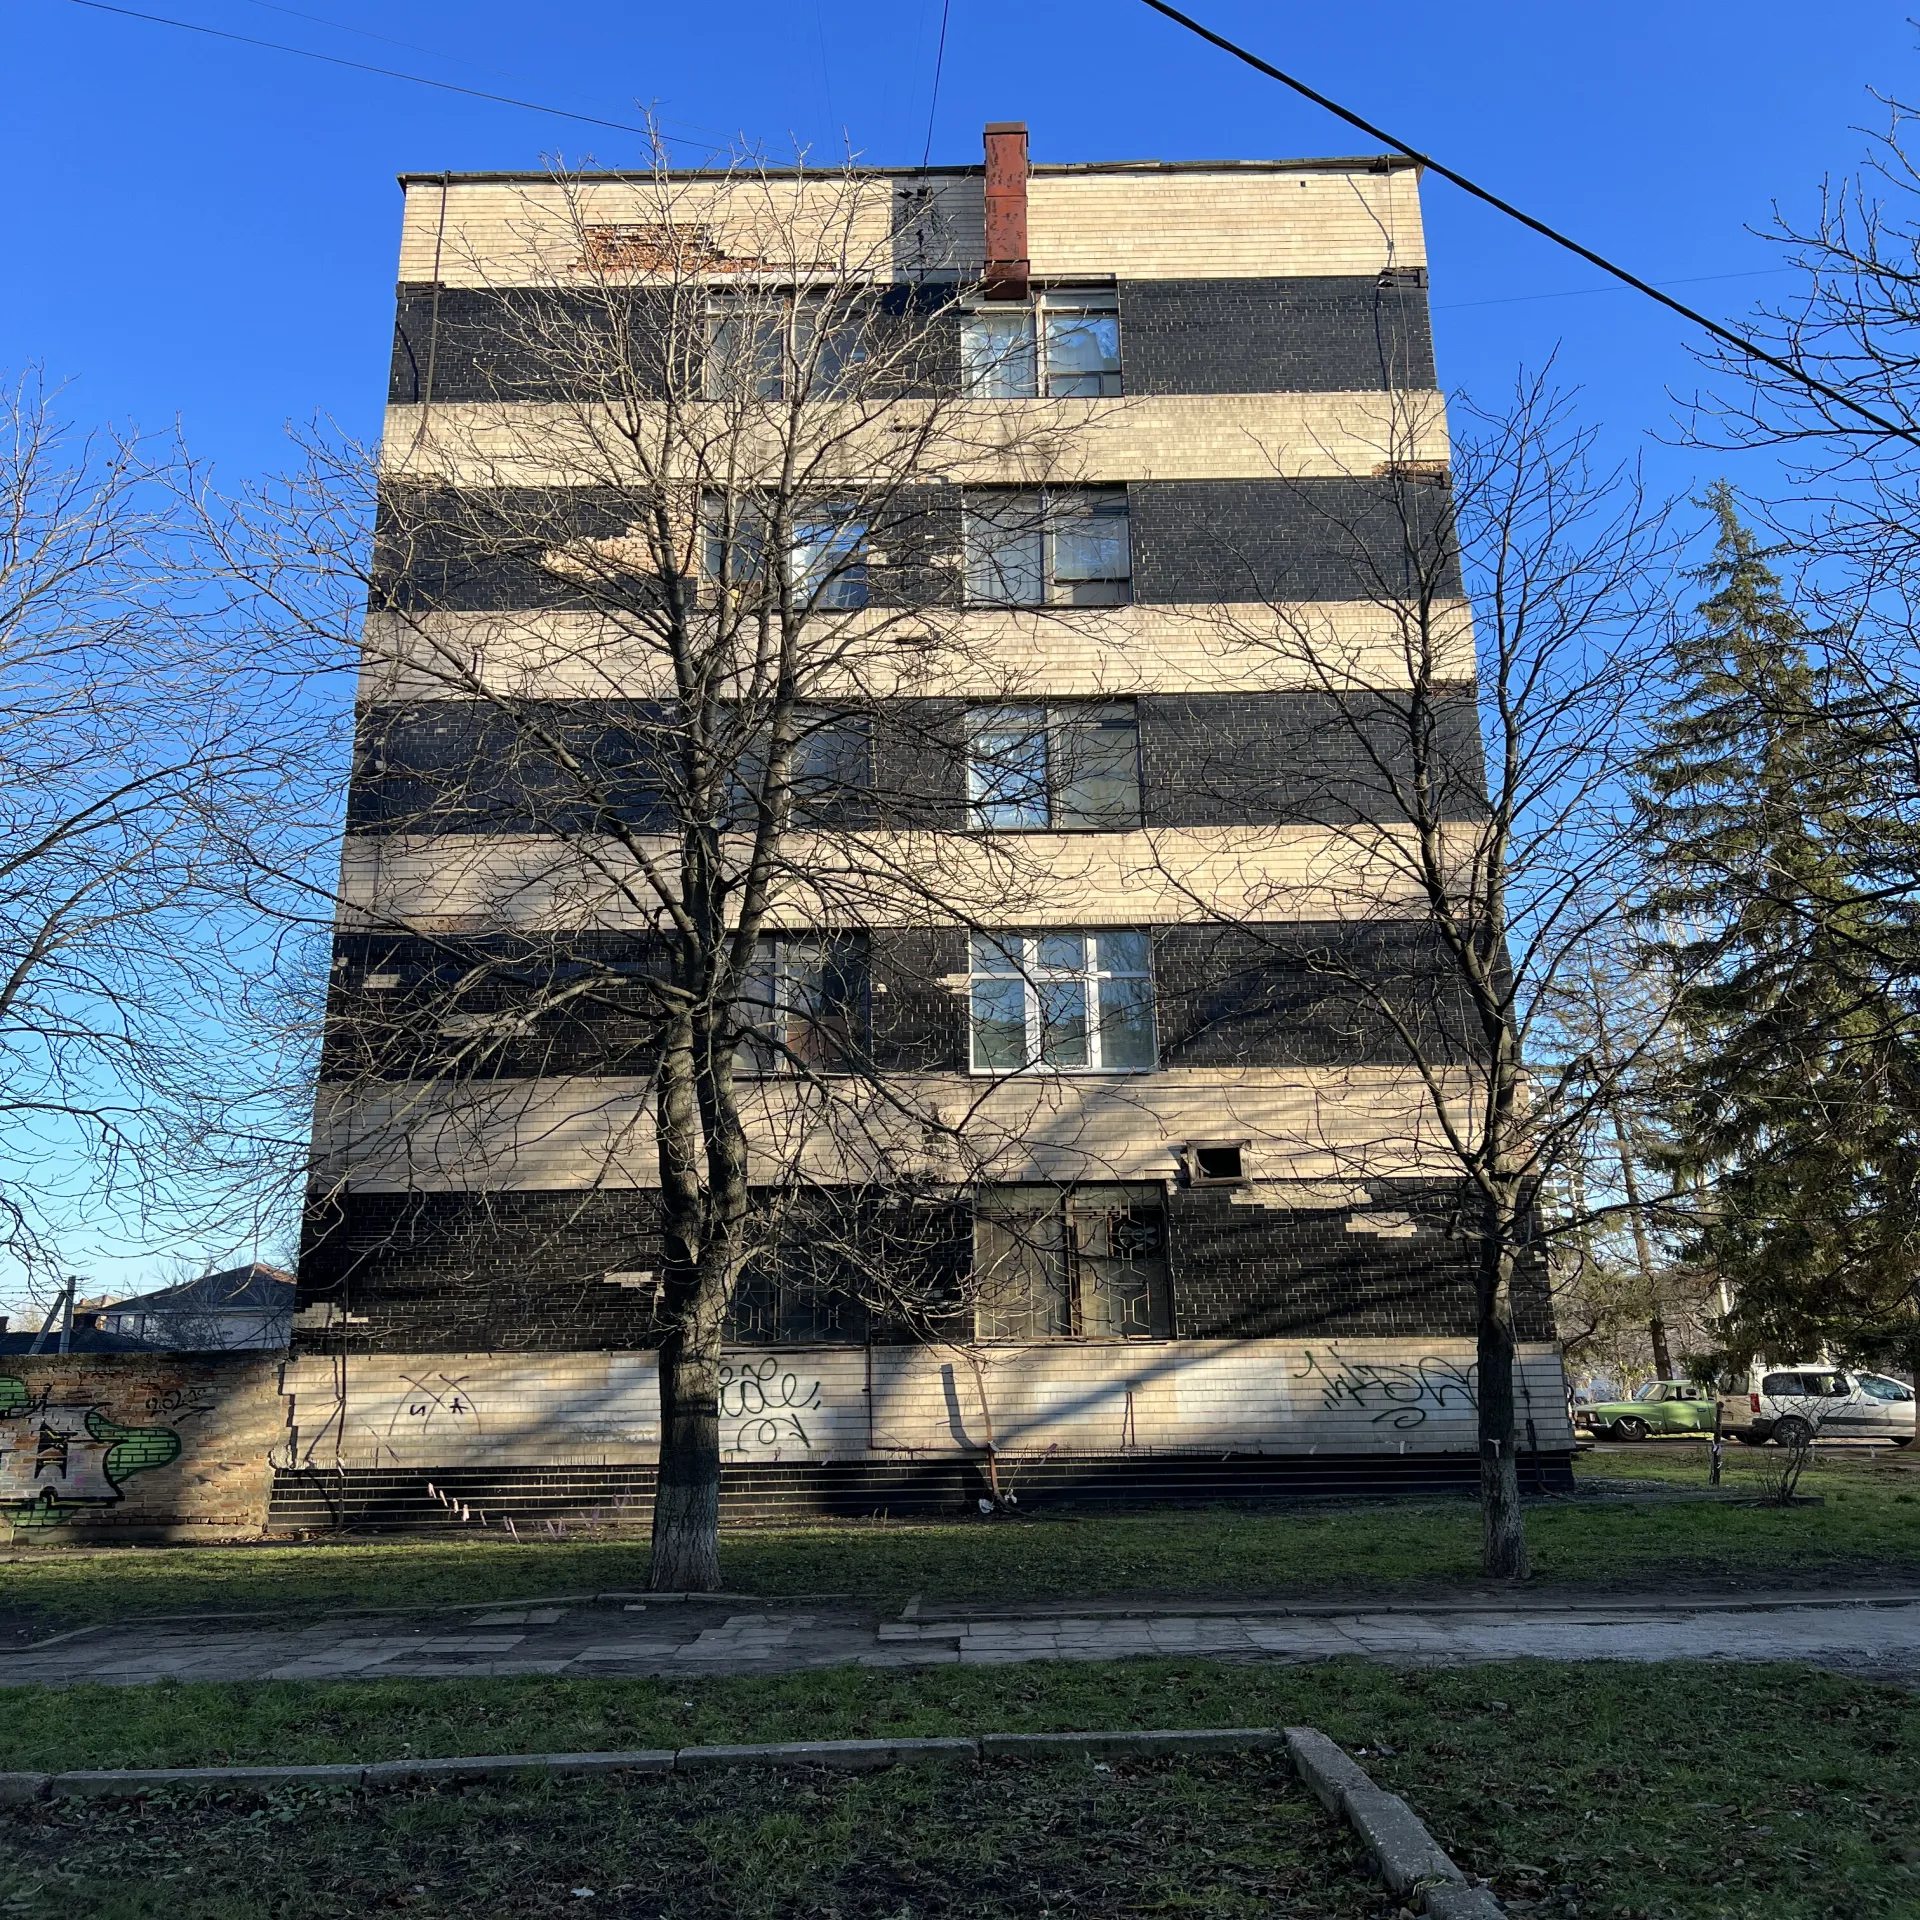 Sale of a 5-story Building in the Center of Kropyvnytskyi